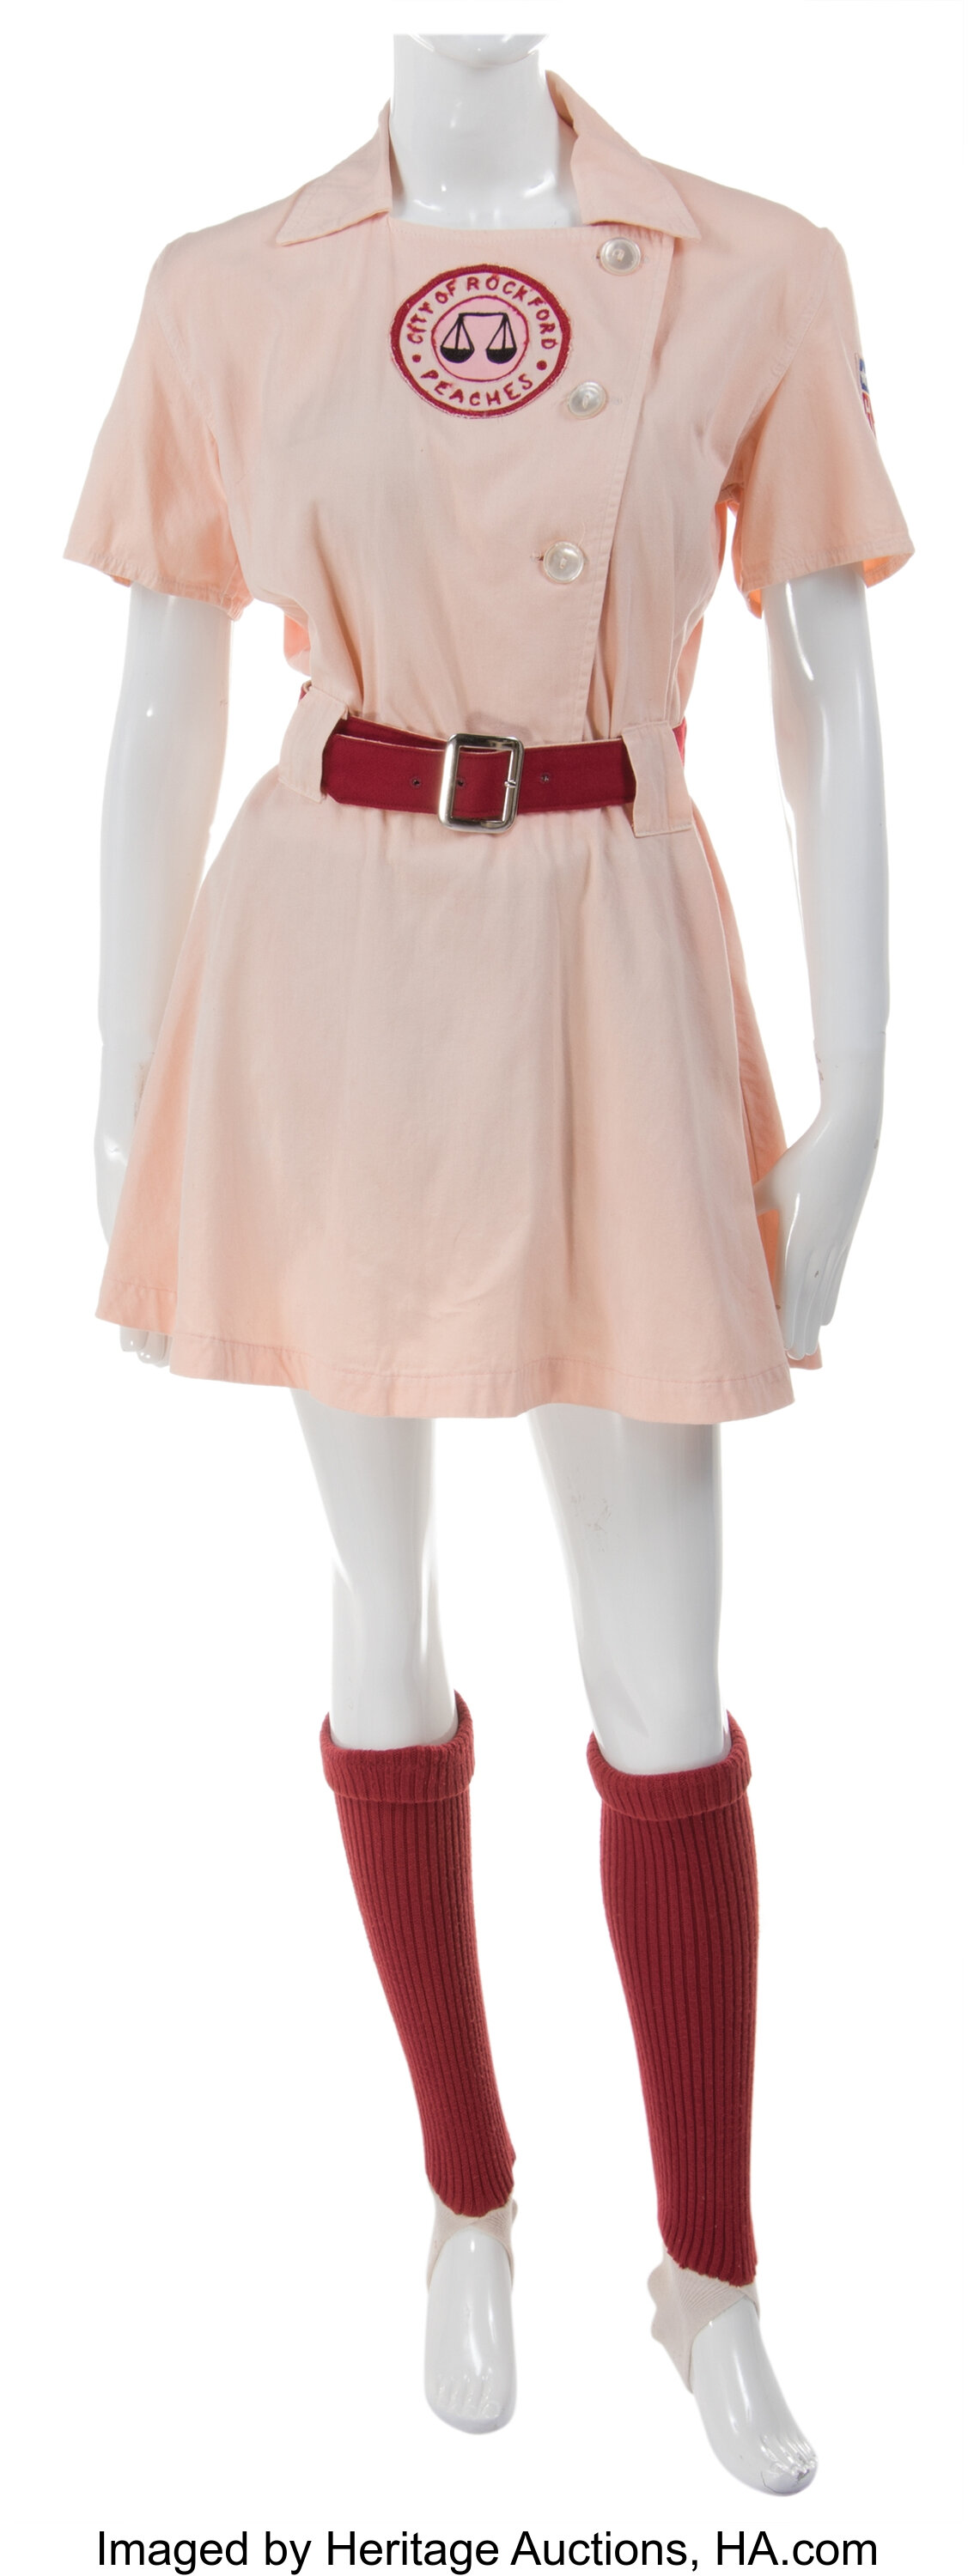 Anne Ramsay Helen Haley Rockford Peaches uniform from A League of, Lot  #1798